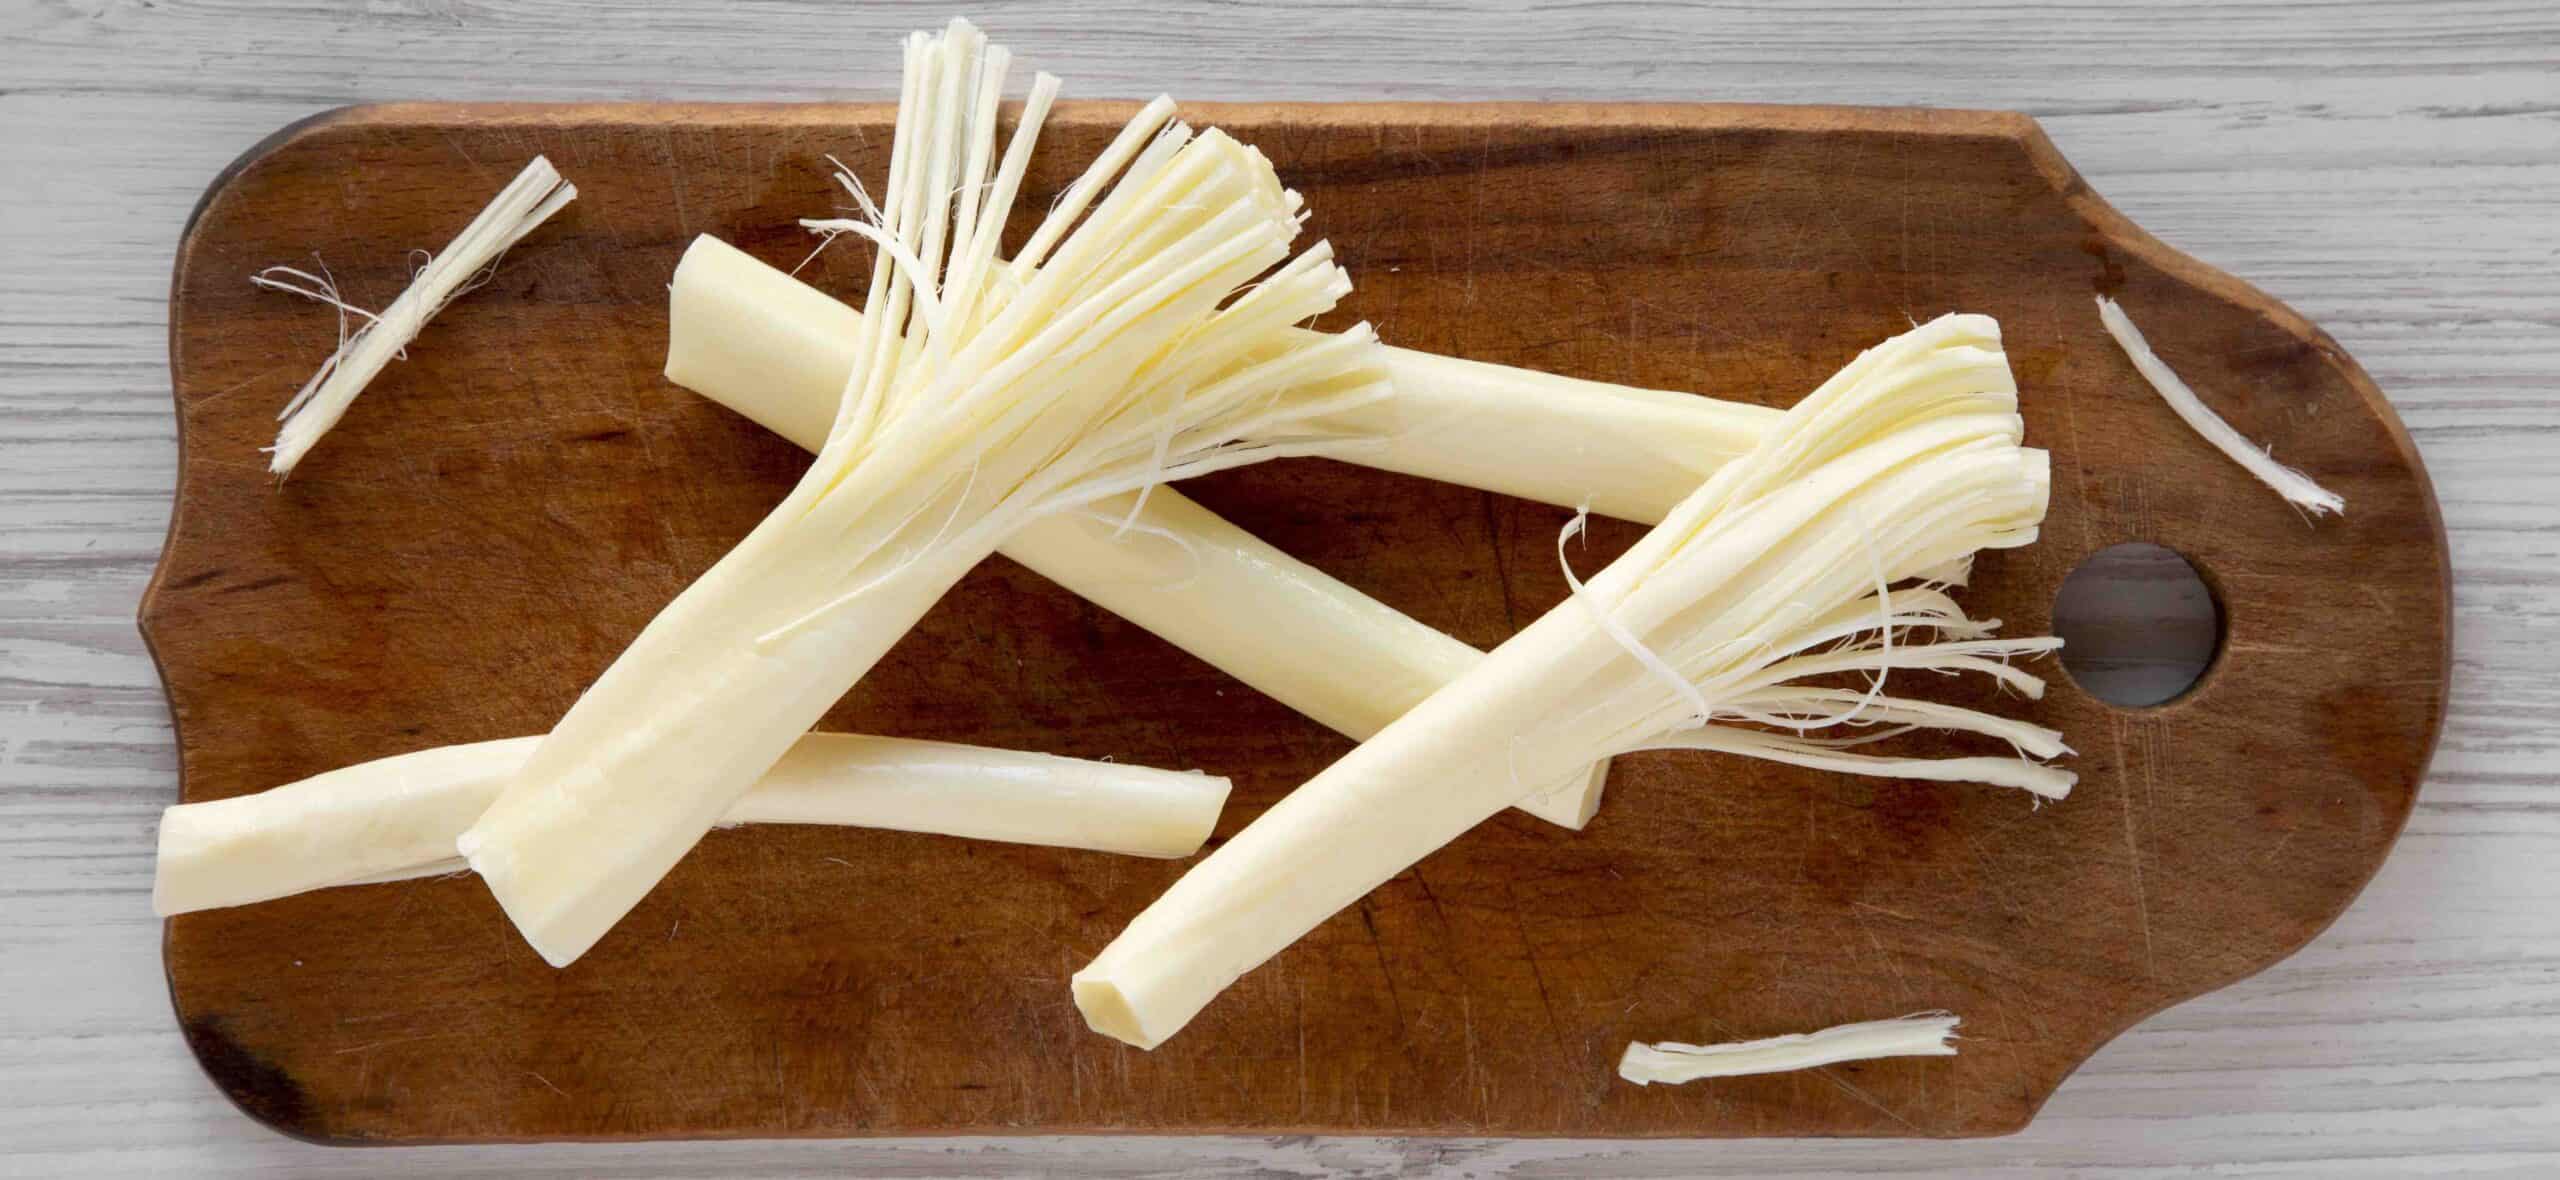 String cheese on rustic wooden board over white wooden surface, top view. Healthy snack. Flat lay, overhead, from above.